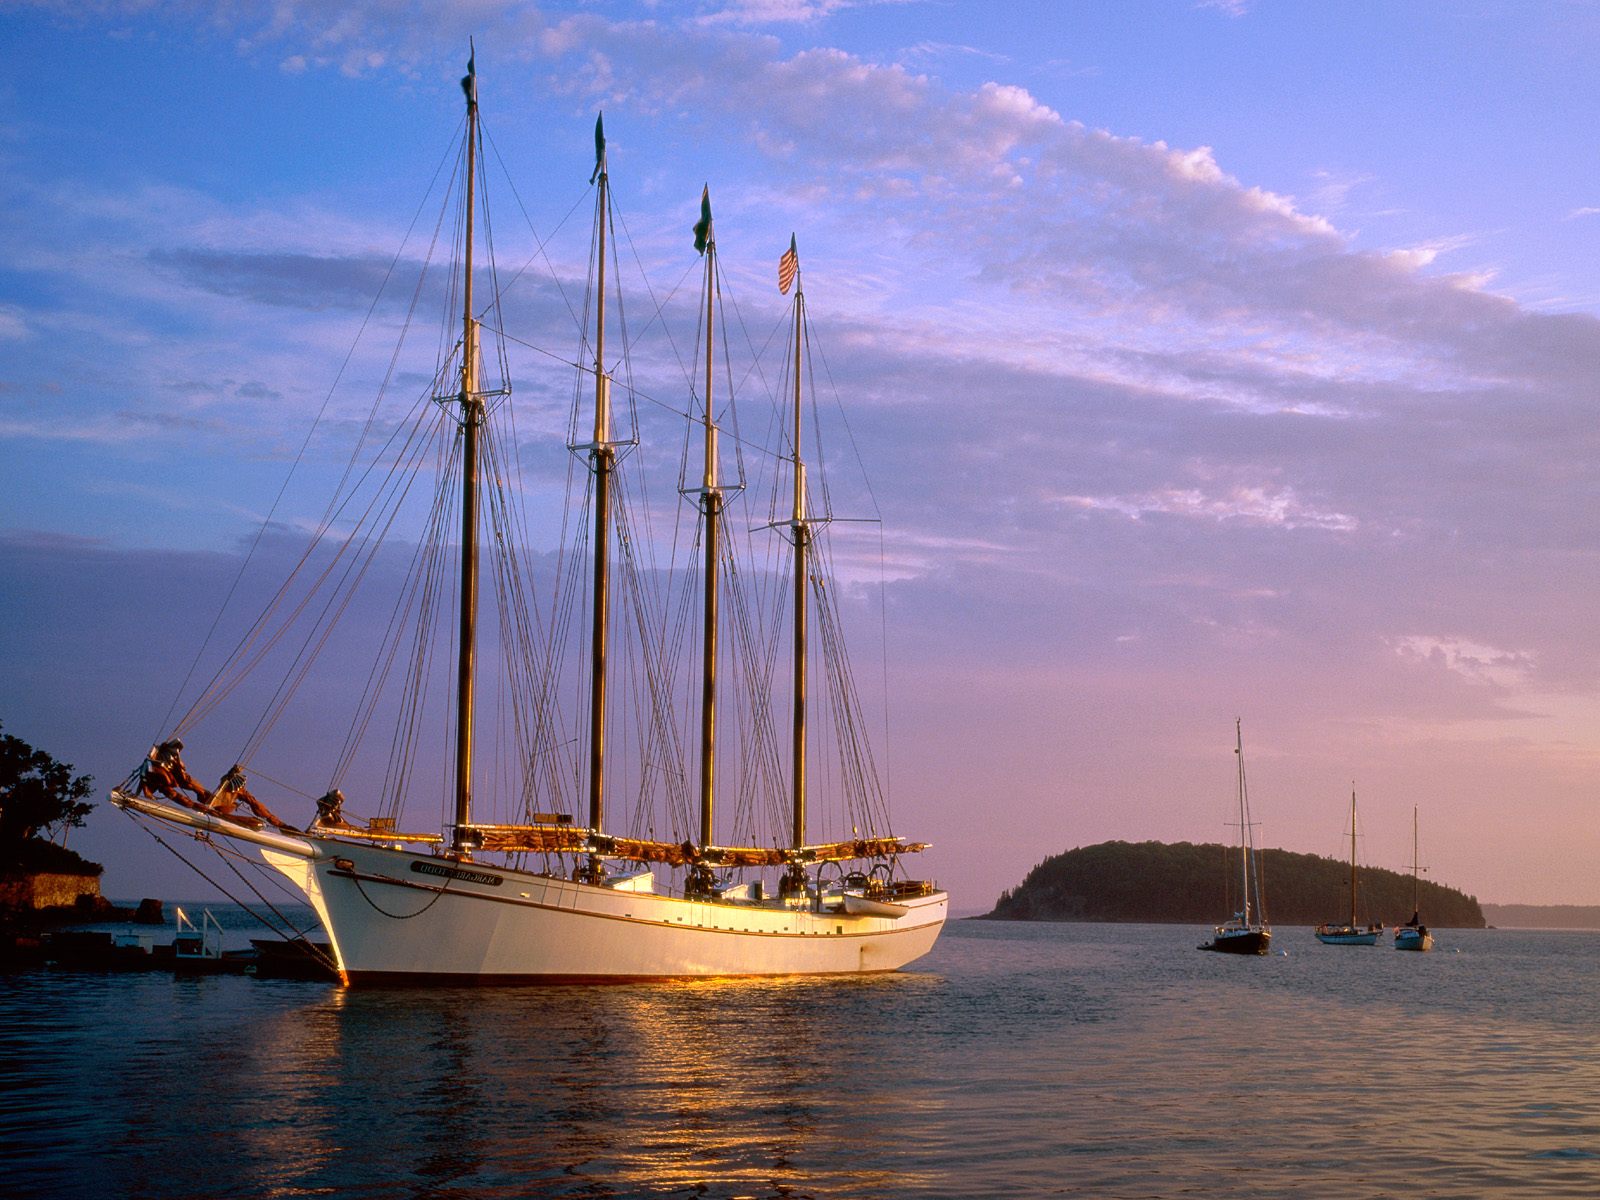 Pm Sunset Windjammer Cruise On The Margaret Todd Sailing From